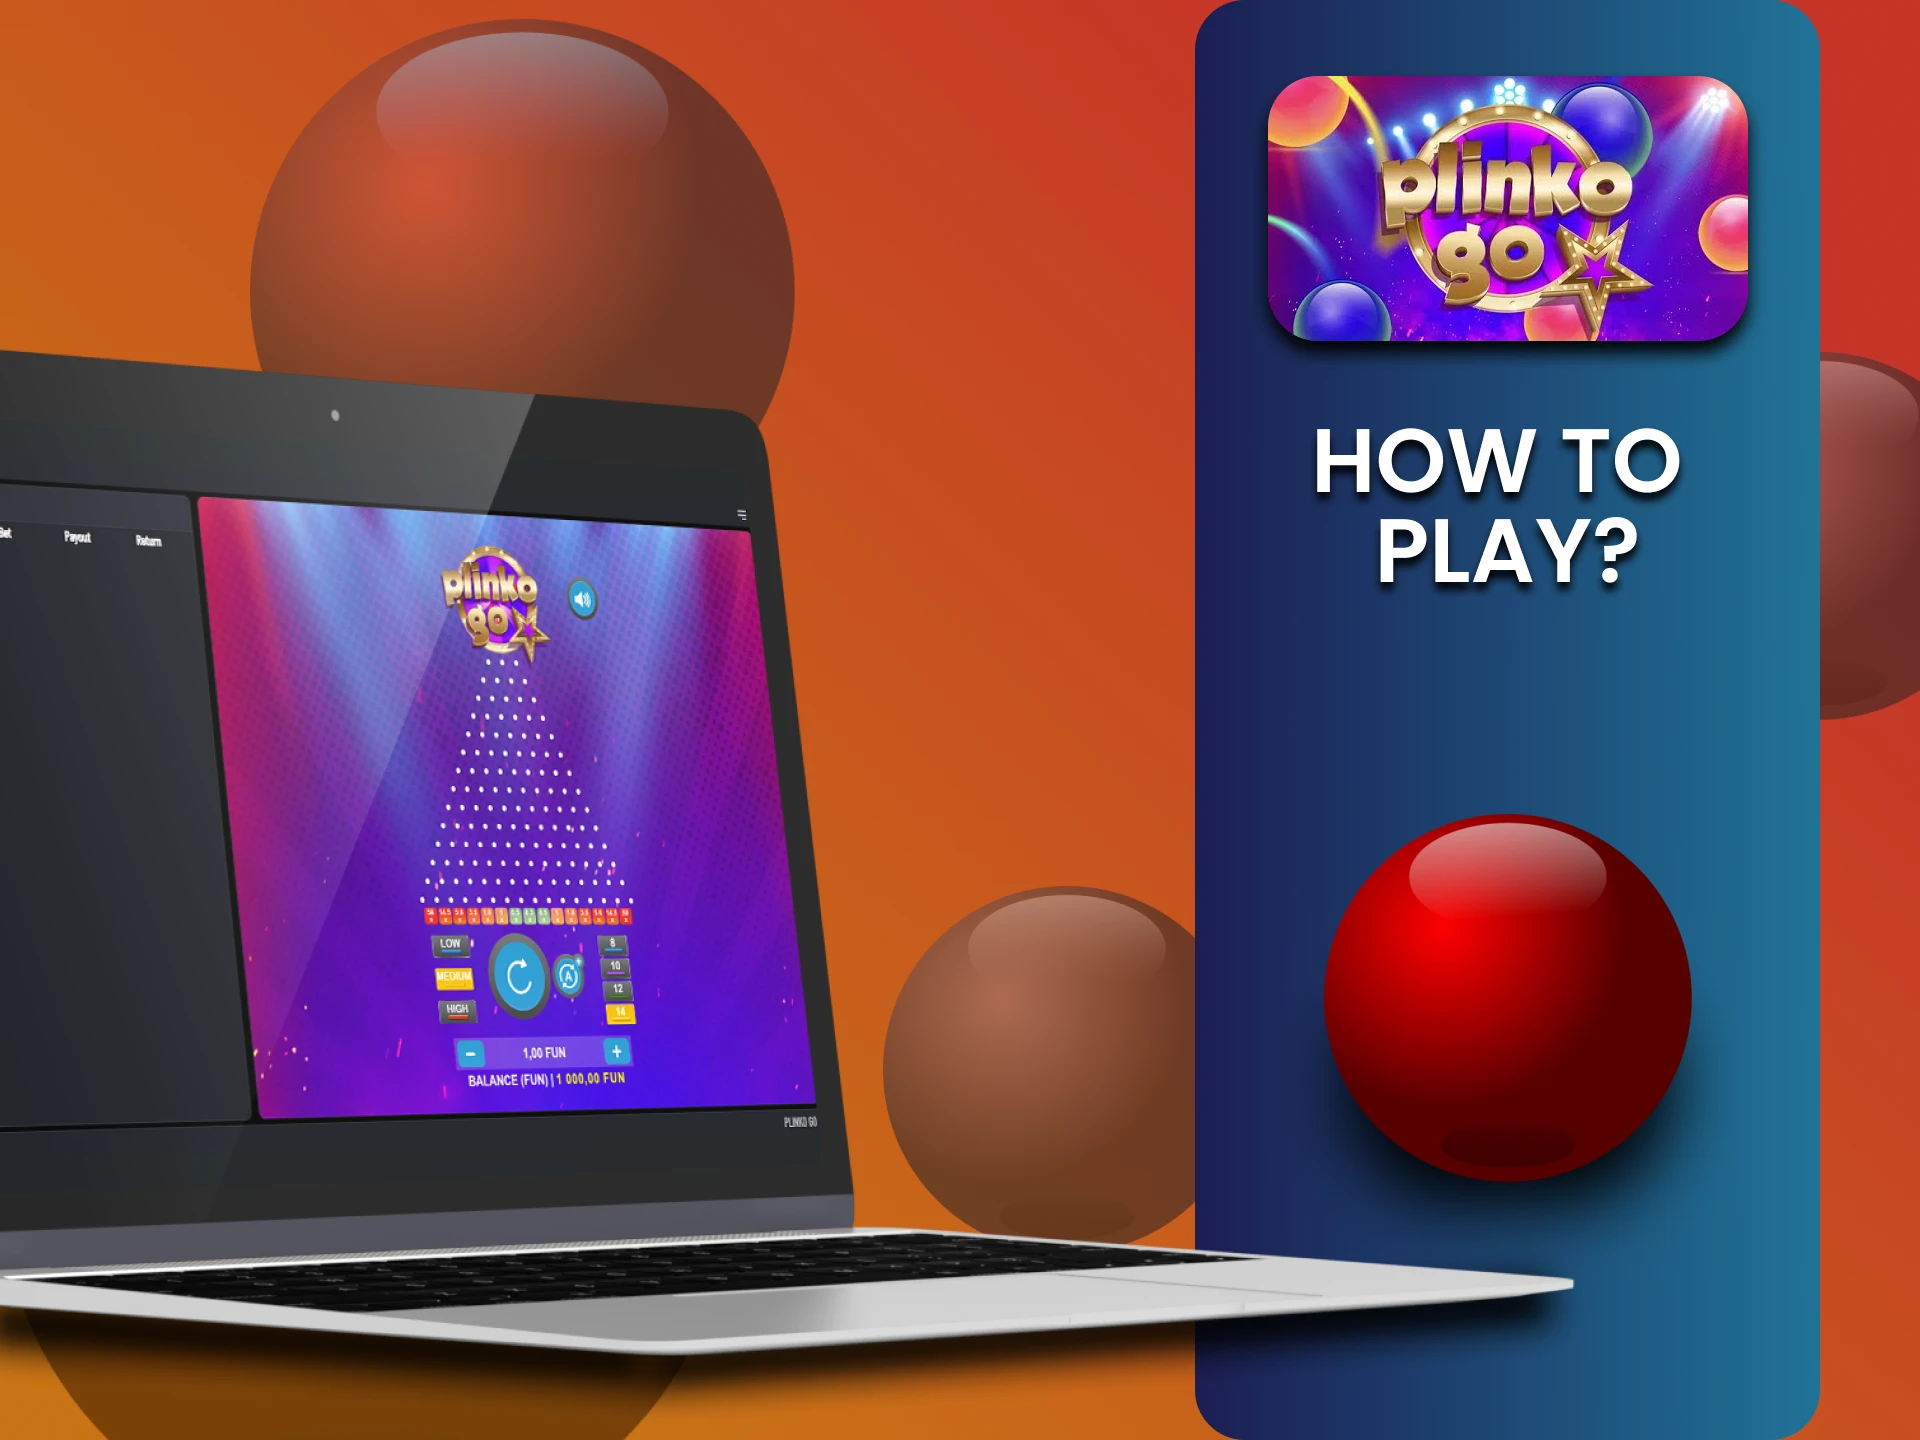 Find out how to start playing Plinko Go.